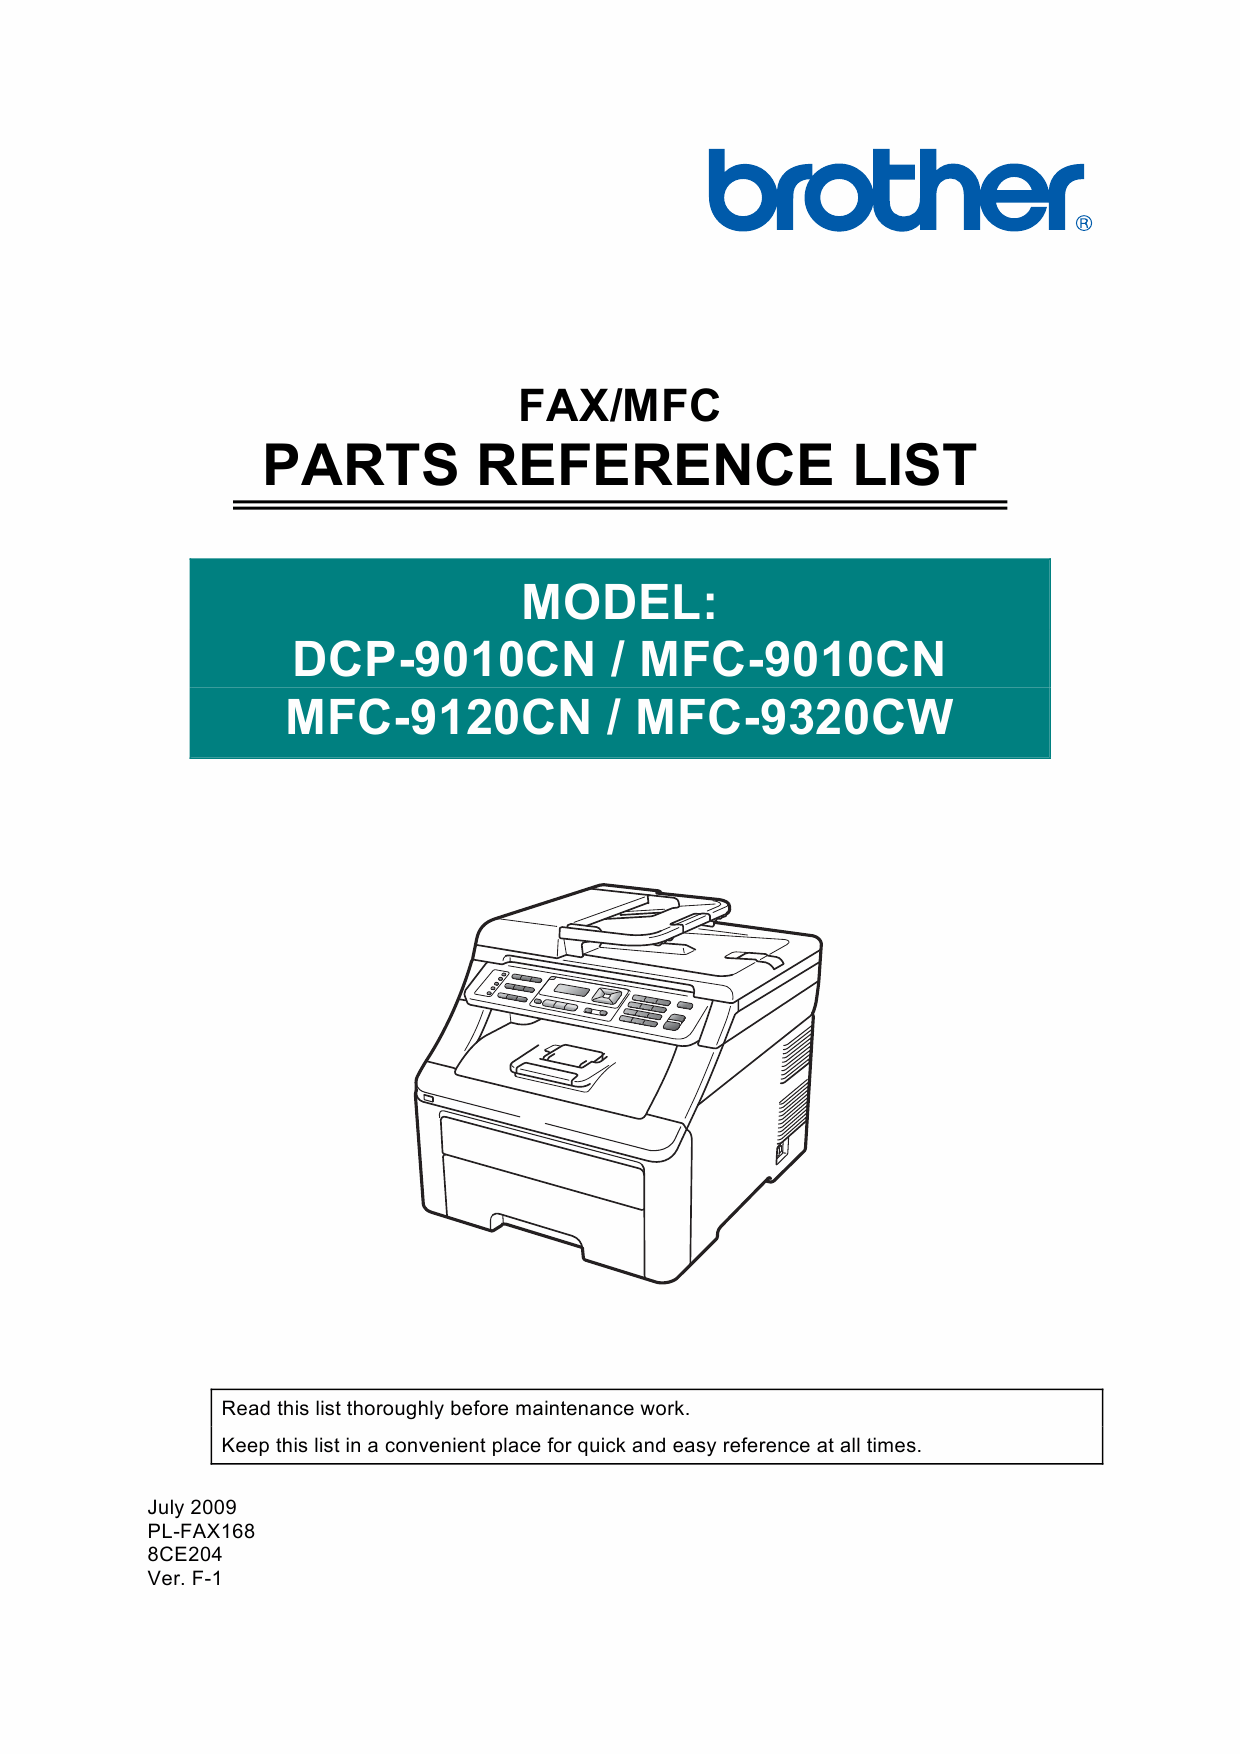 Brother MFC 9010 9120 9320 CN-CW DCP9010CN Parts Reference-1